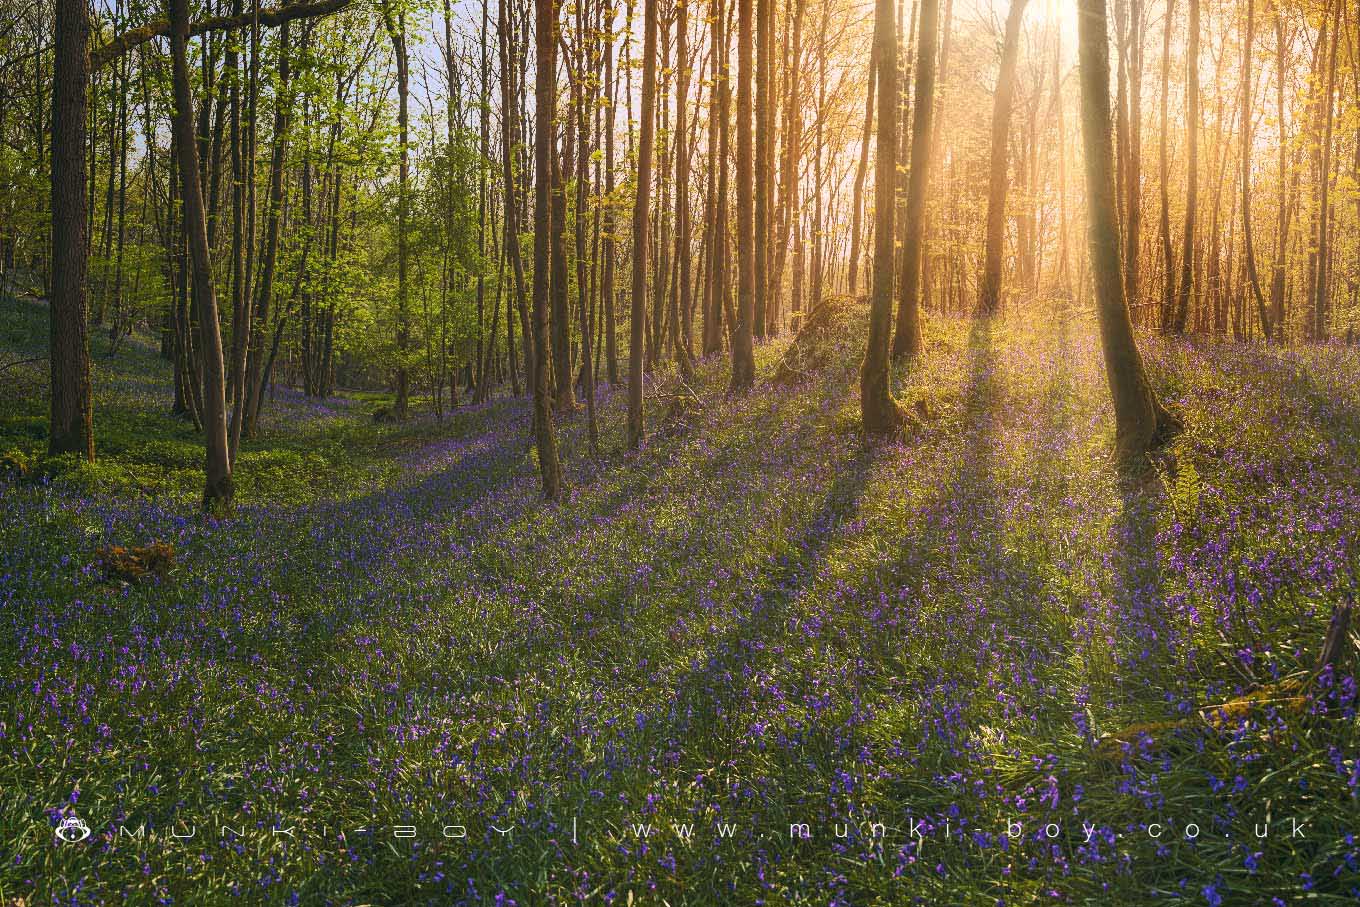 Bluebell Woods in Cumbria